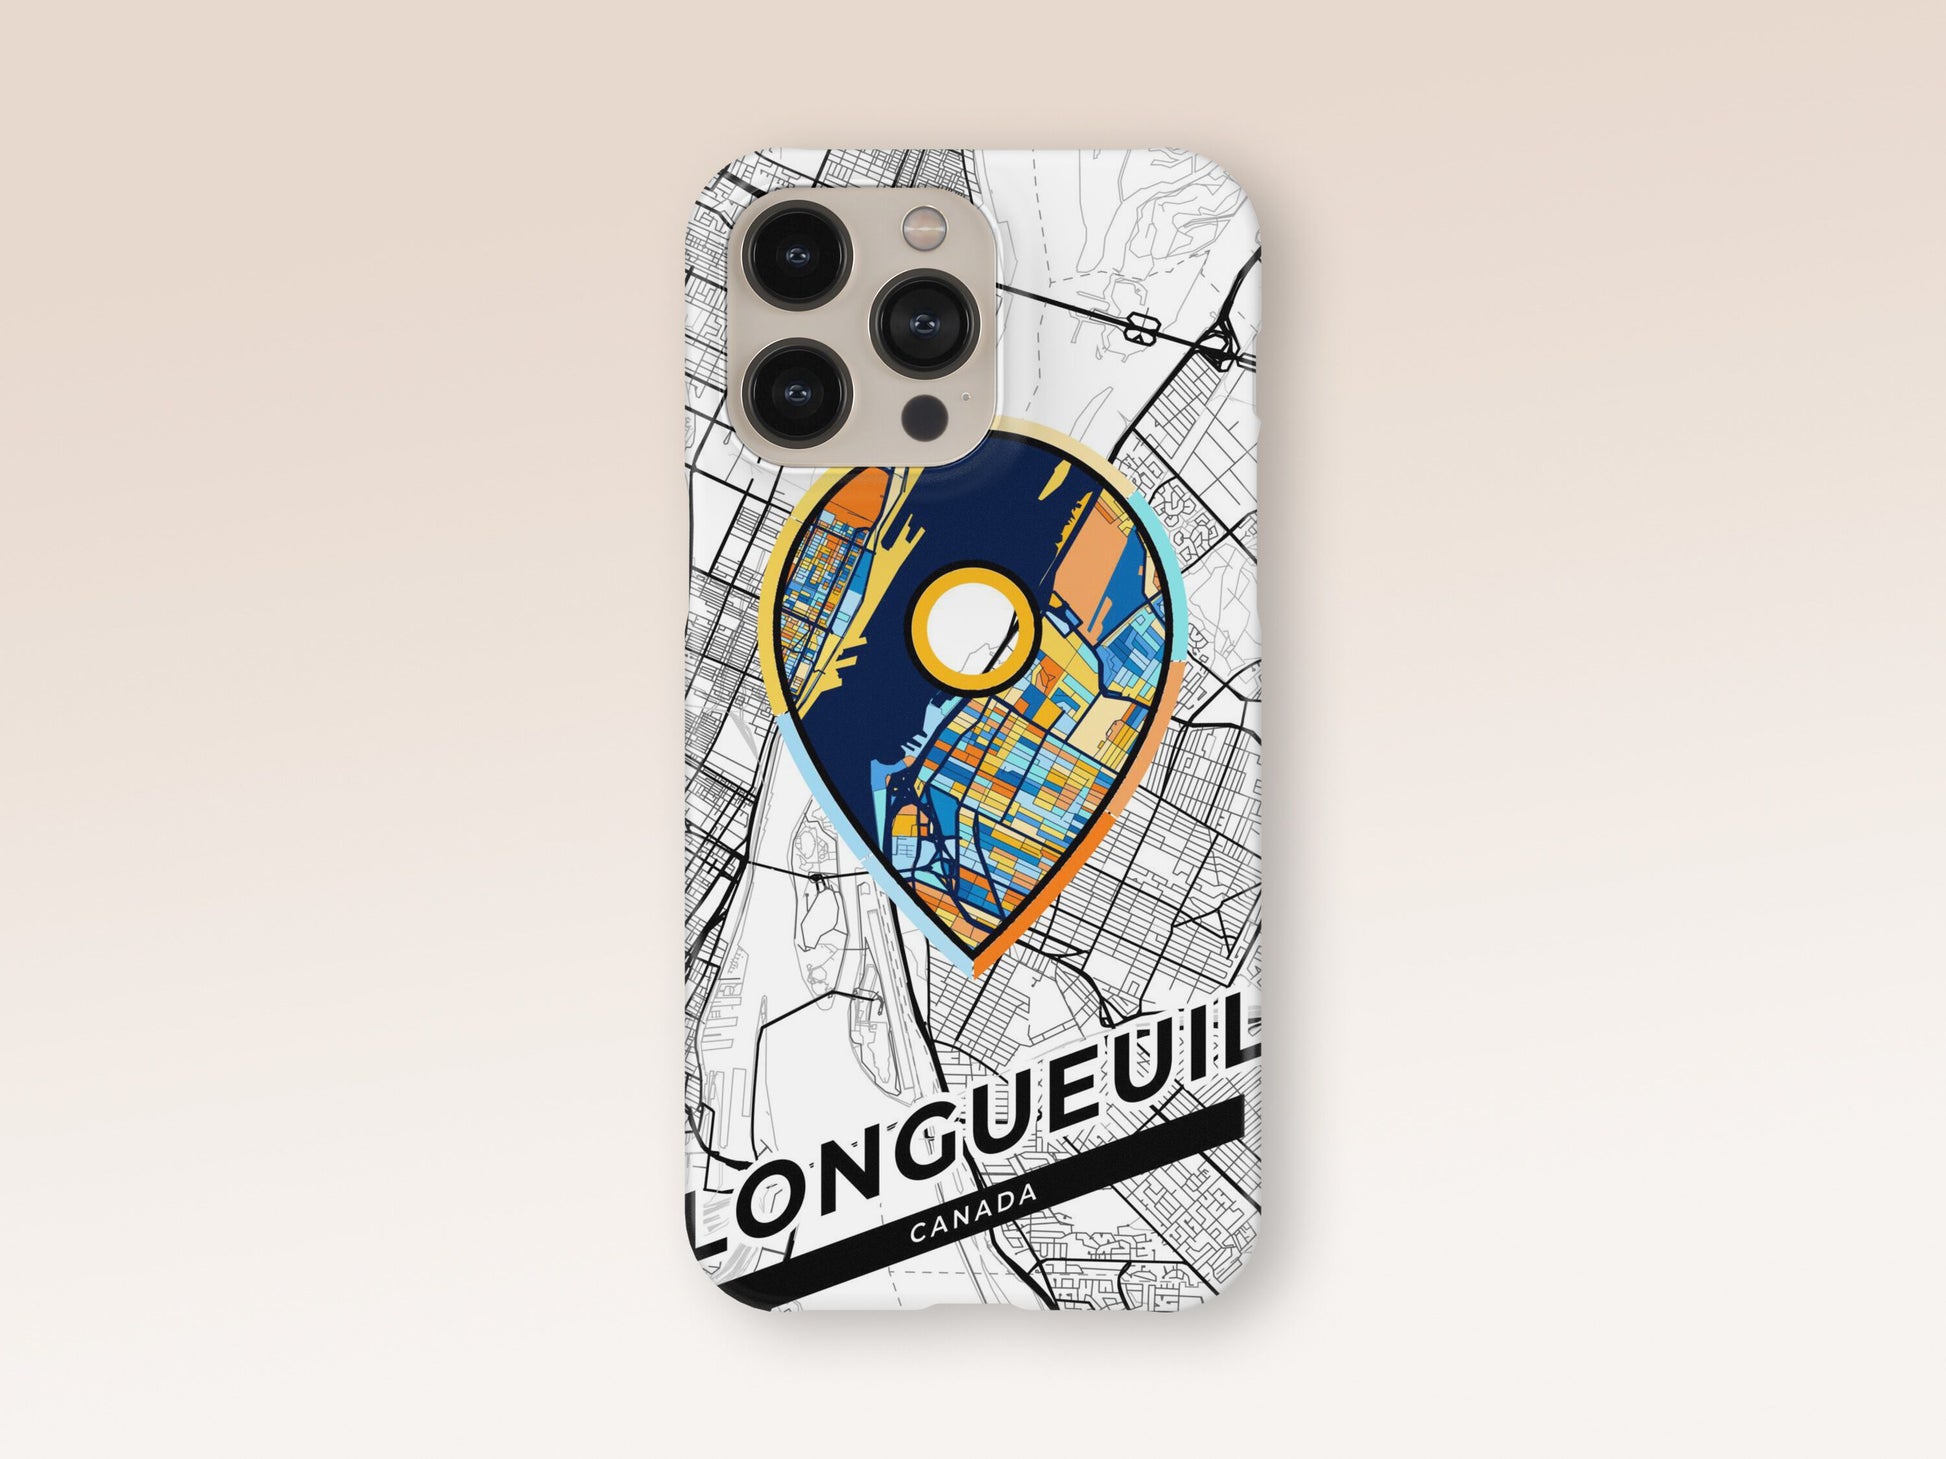 Longueuil Canada slim phone case with colorful icon. Birthday, wedding or housewarming gift. Couple match cases. 1